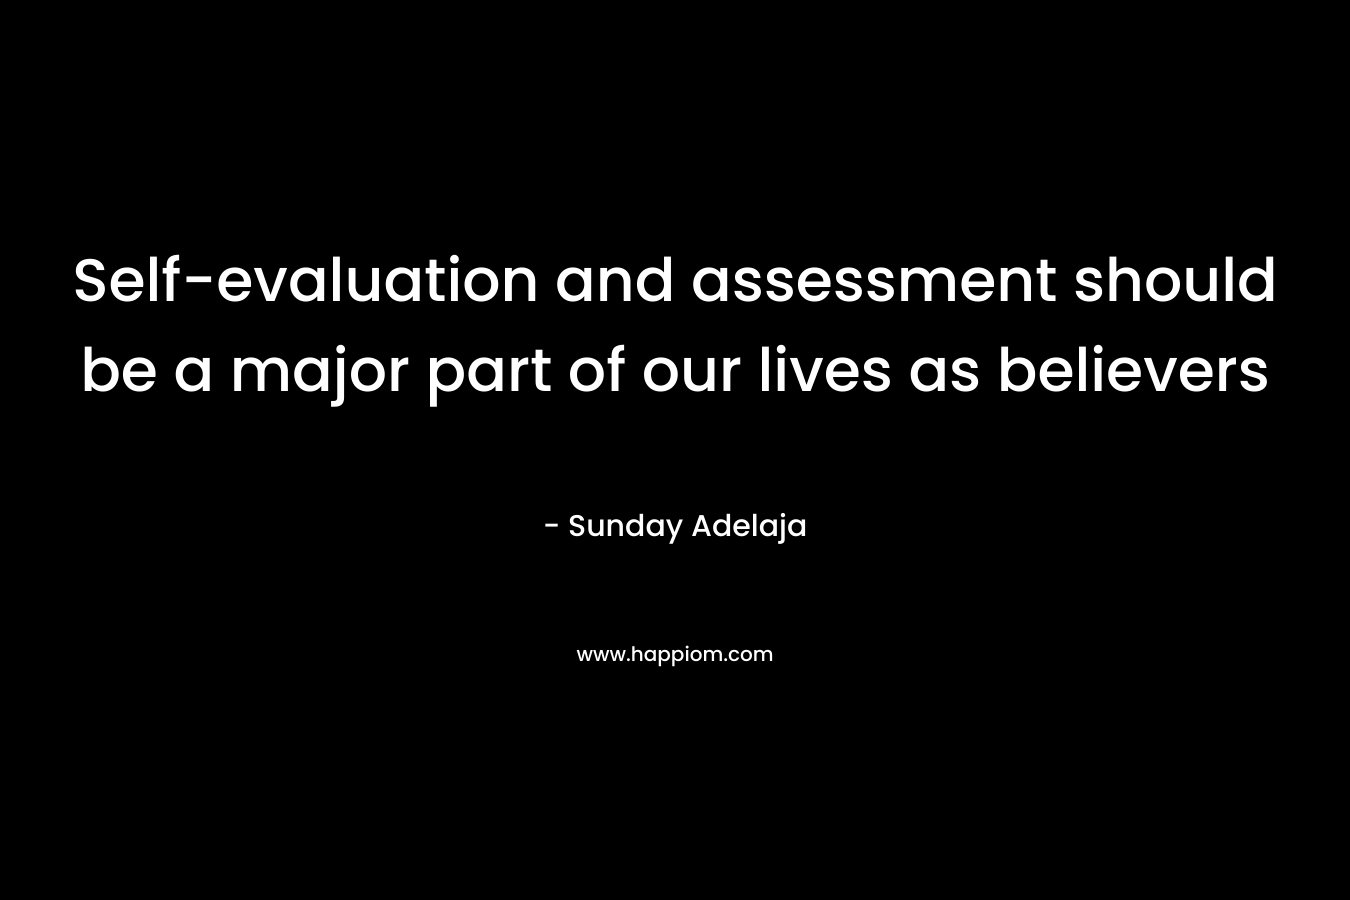 Self-evaluation and assessment should be a major part of our lives as believers